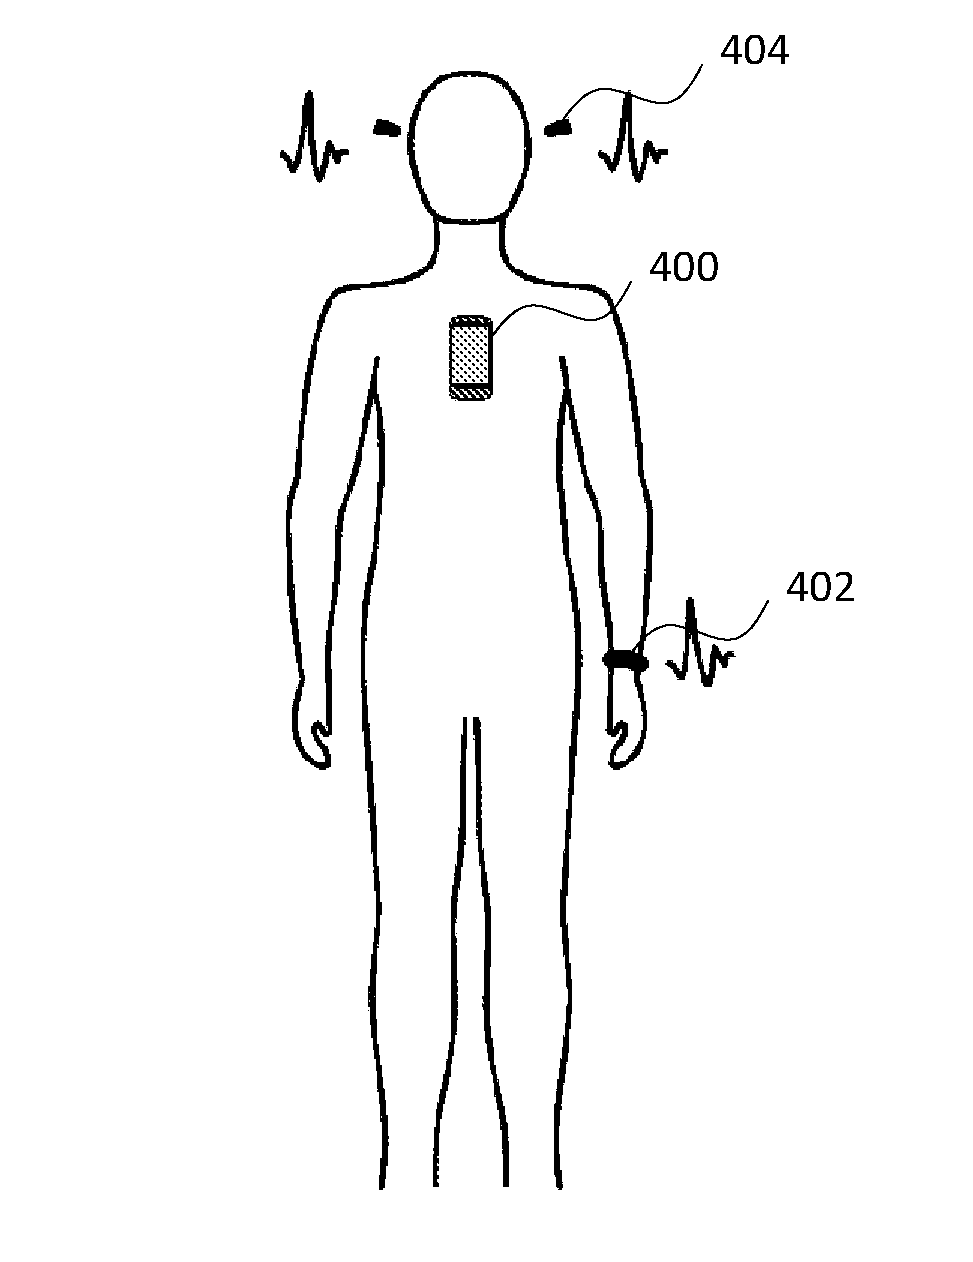 Heart monitoring system